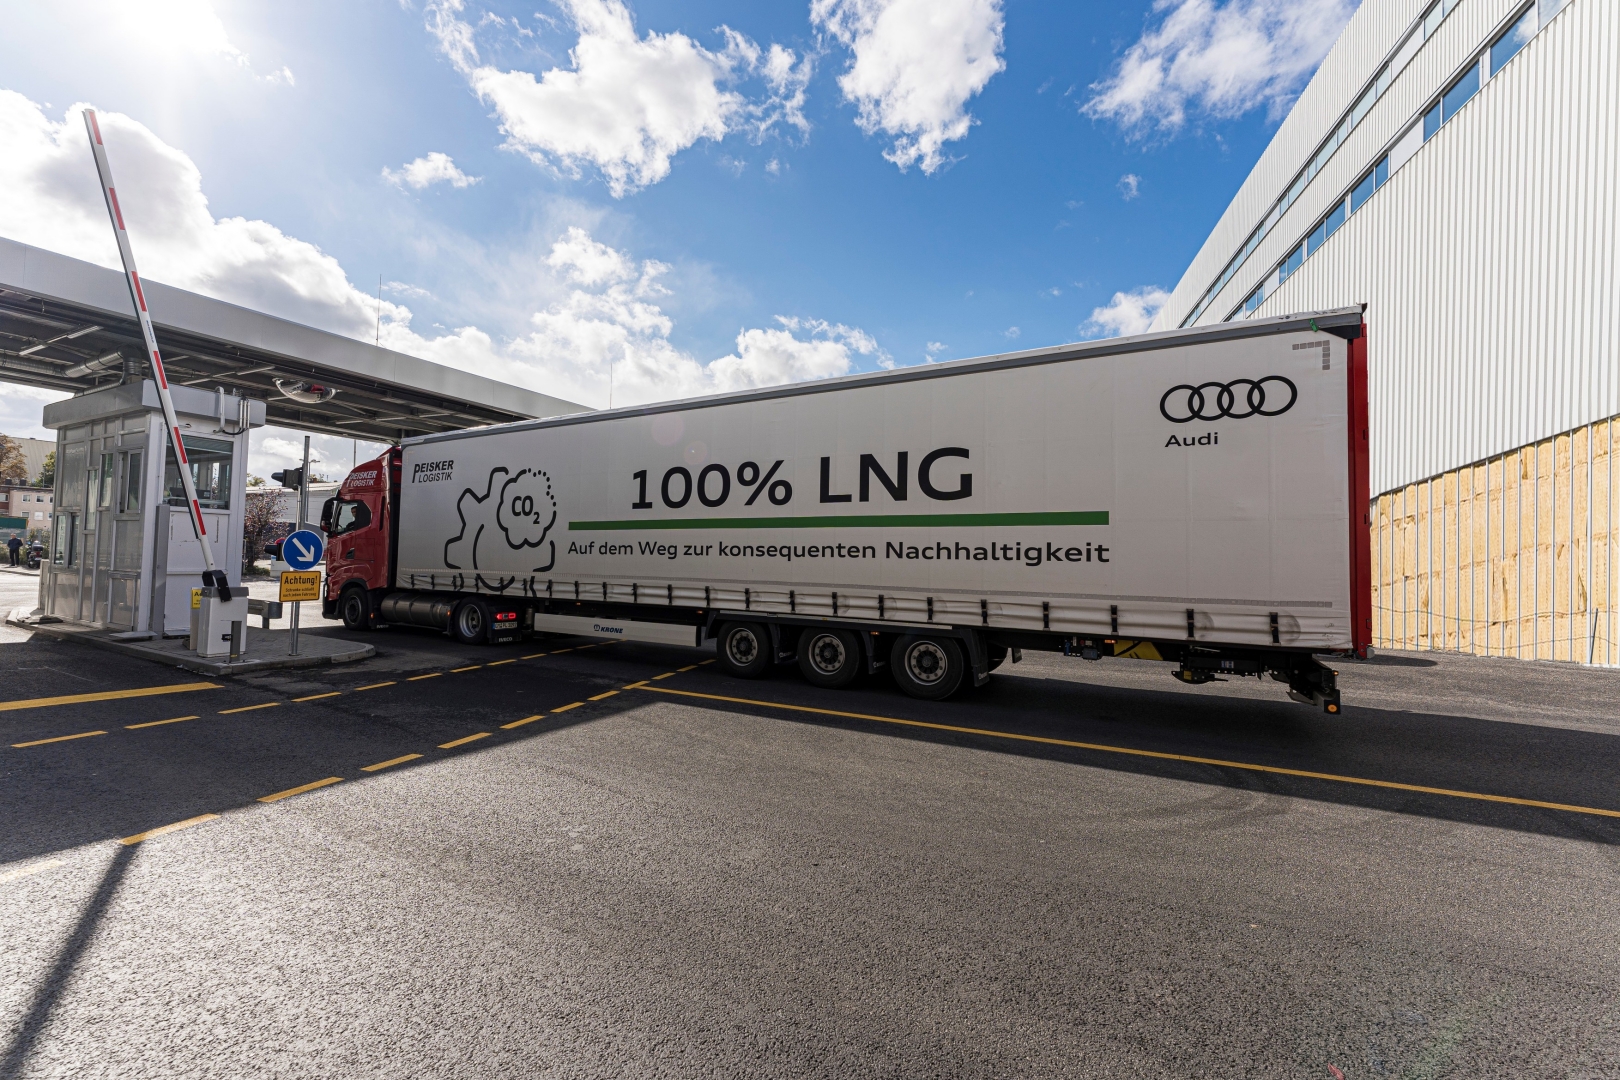 Audi deploys two LNG-fueled trucks at Neckarsulm site